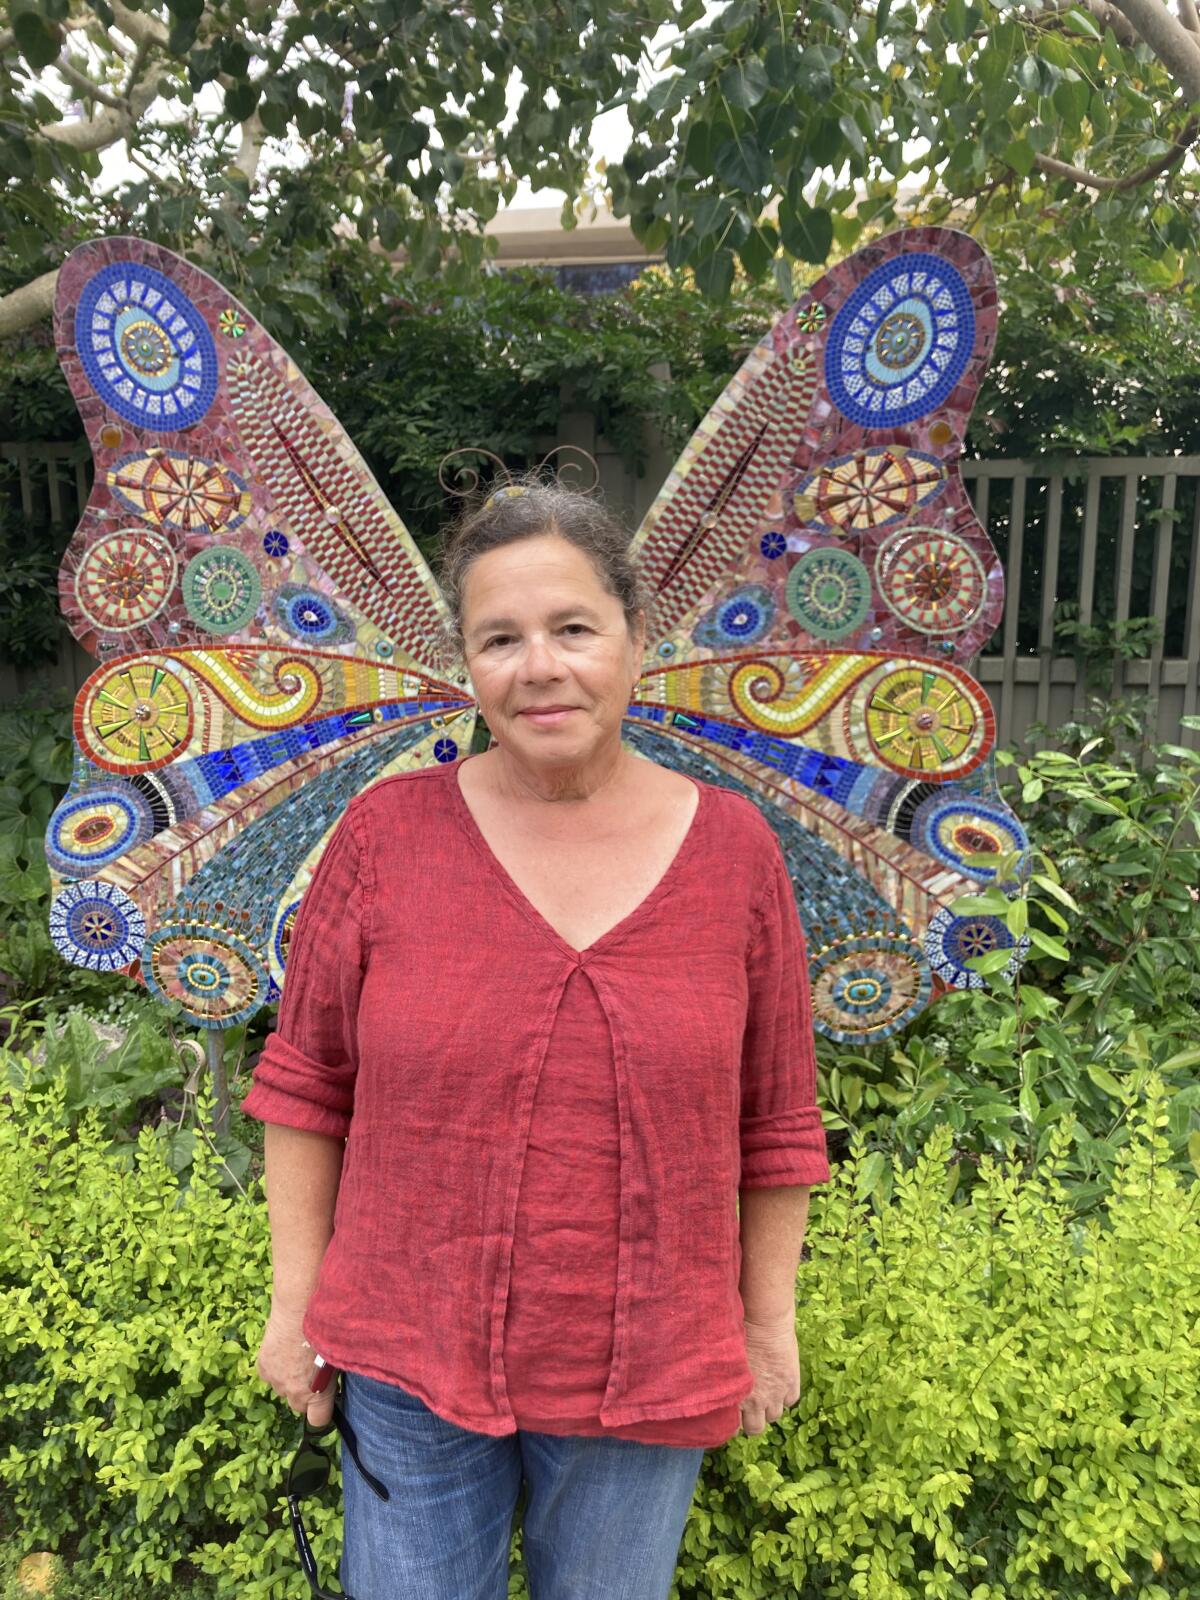 Mosaicist Irina Charny poses in front of one of her mosaics displayed at the Sherman Library & Gardens.